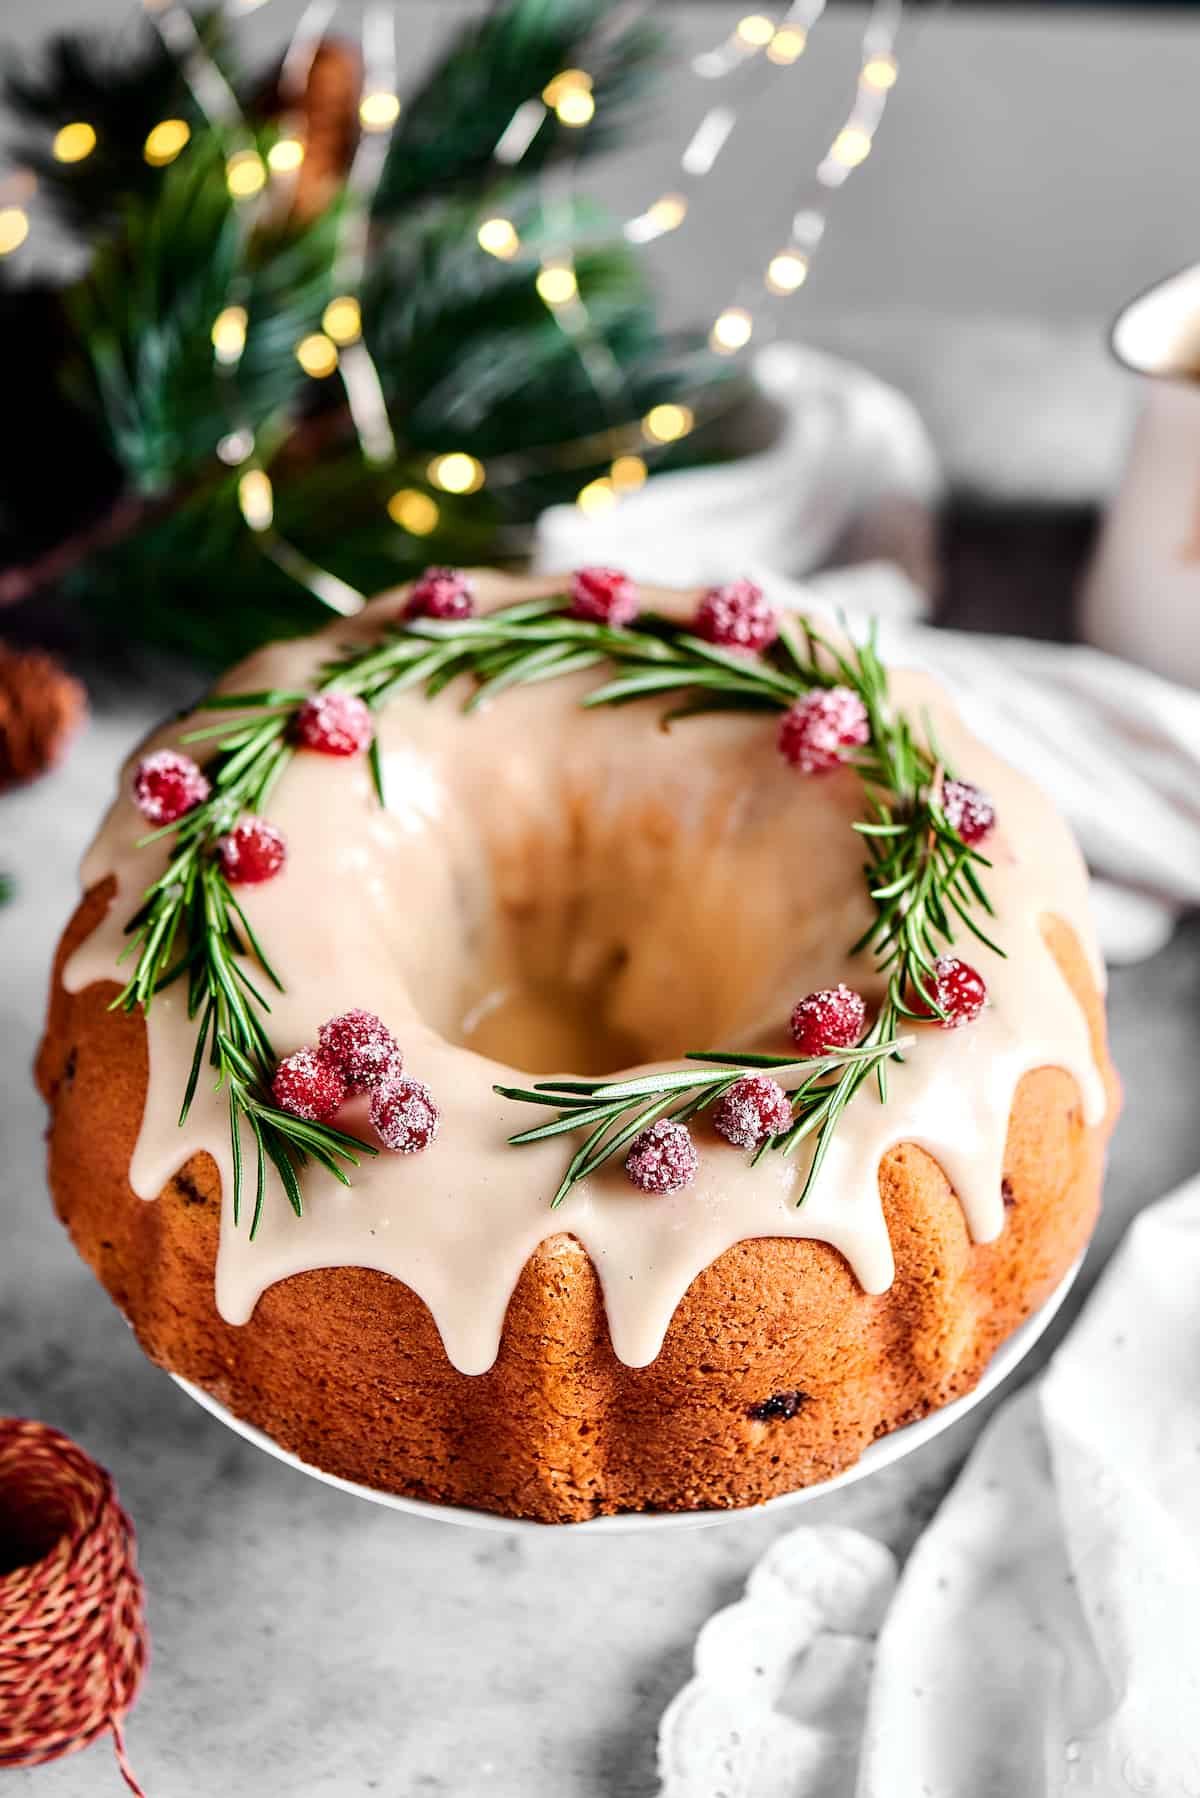 Overhead shot of a Bundt cake garnished with rosemary and sugared cranberries.